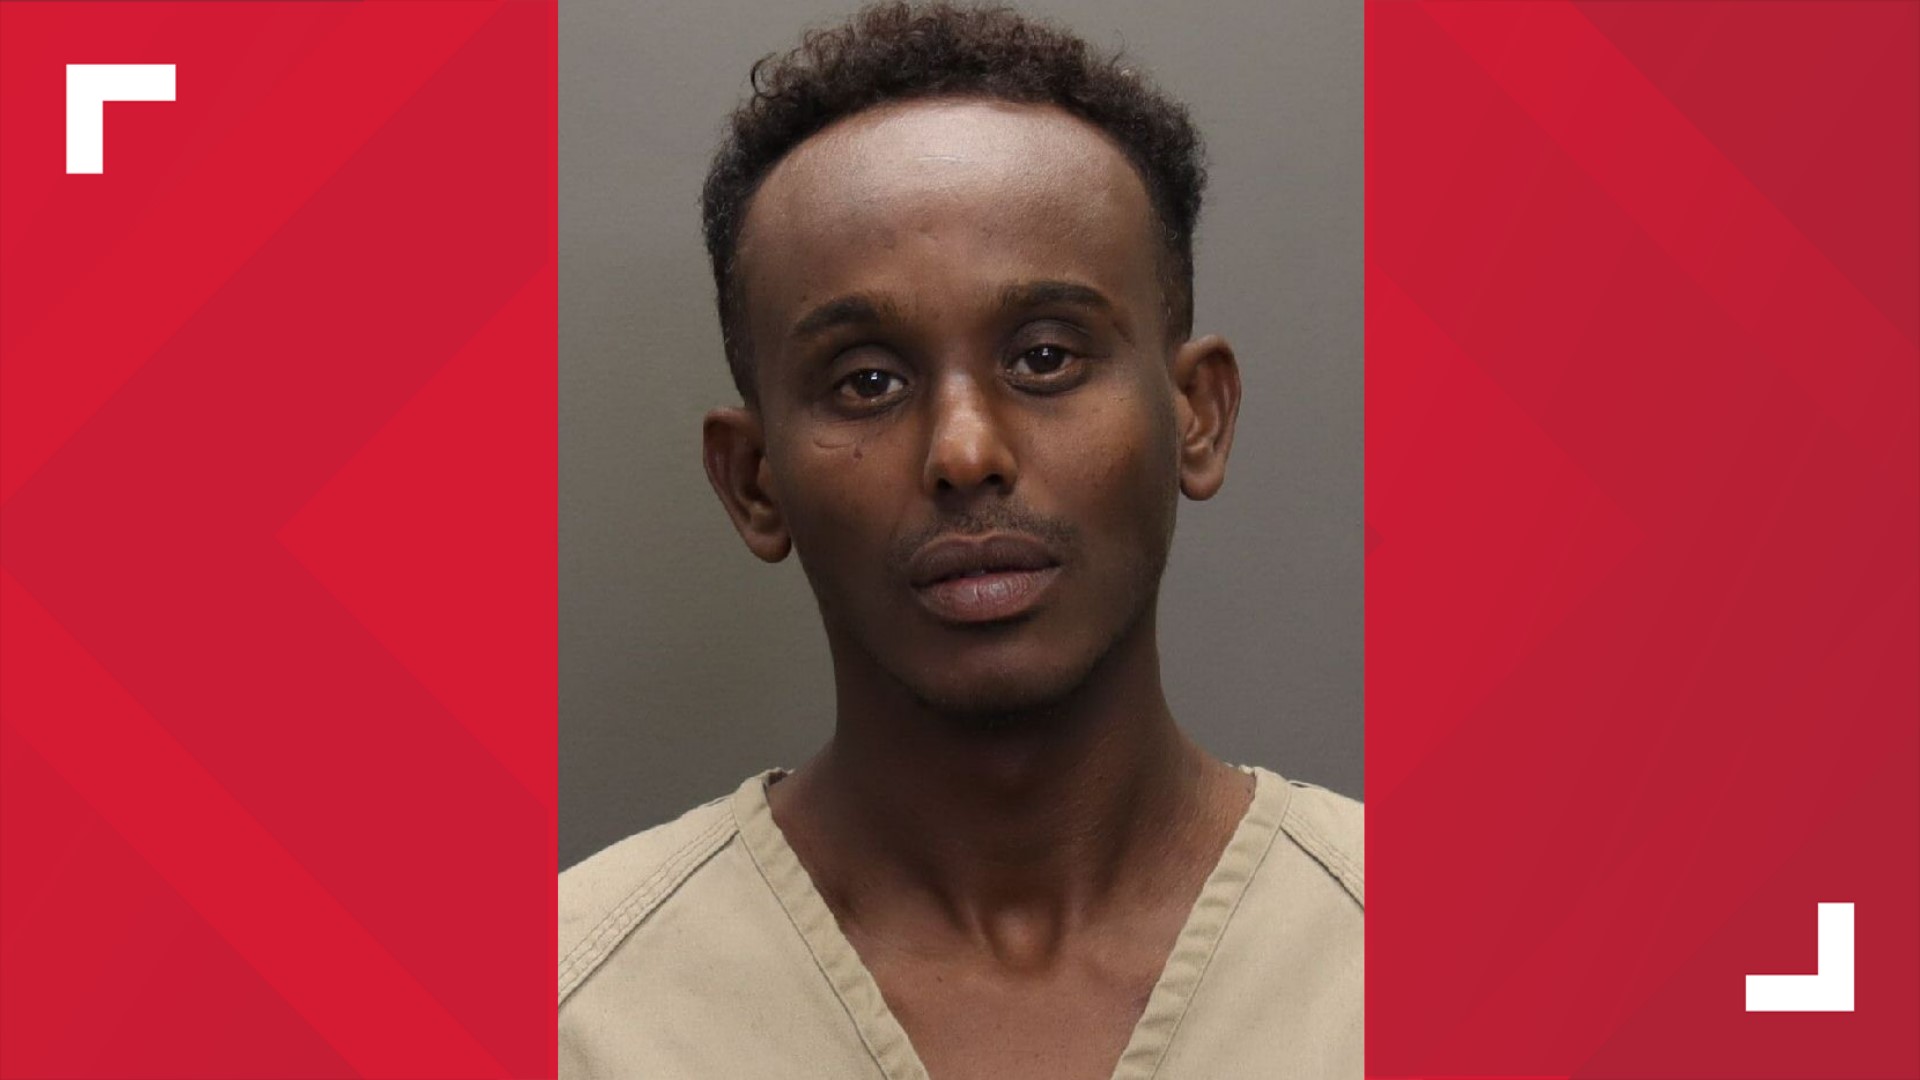 Police say 34-year-old Najah Ahmed Mohamed turned himself into a Clinton Township Police Officer for assaulting a 39-year-old man.